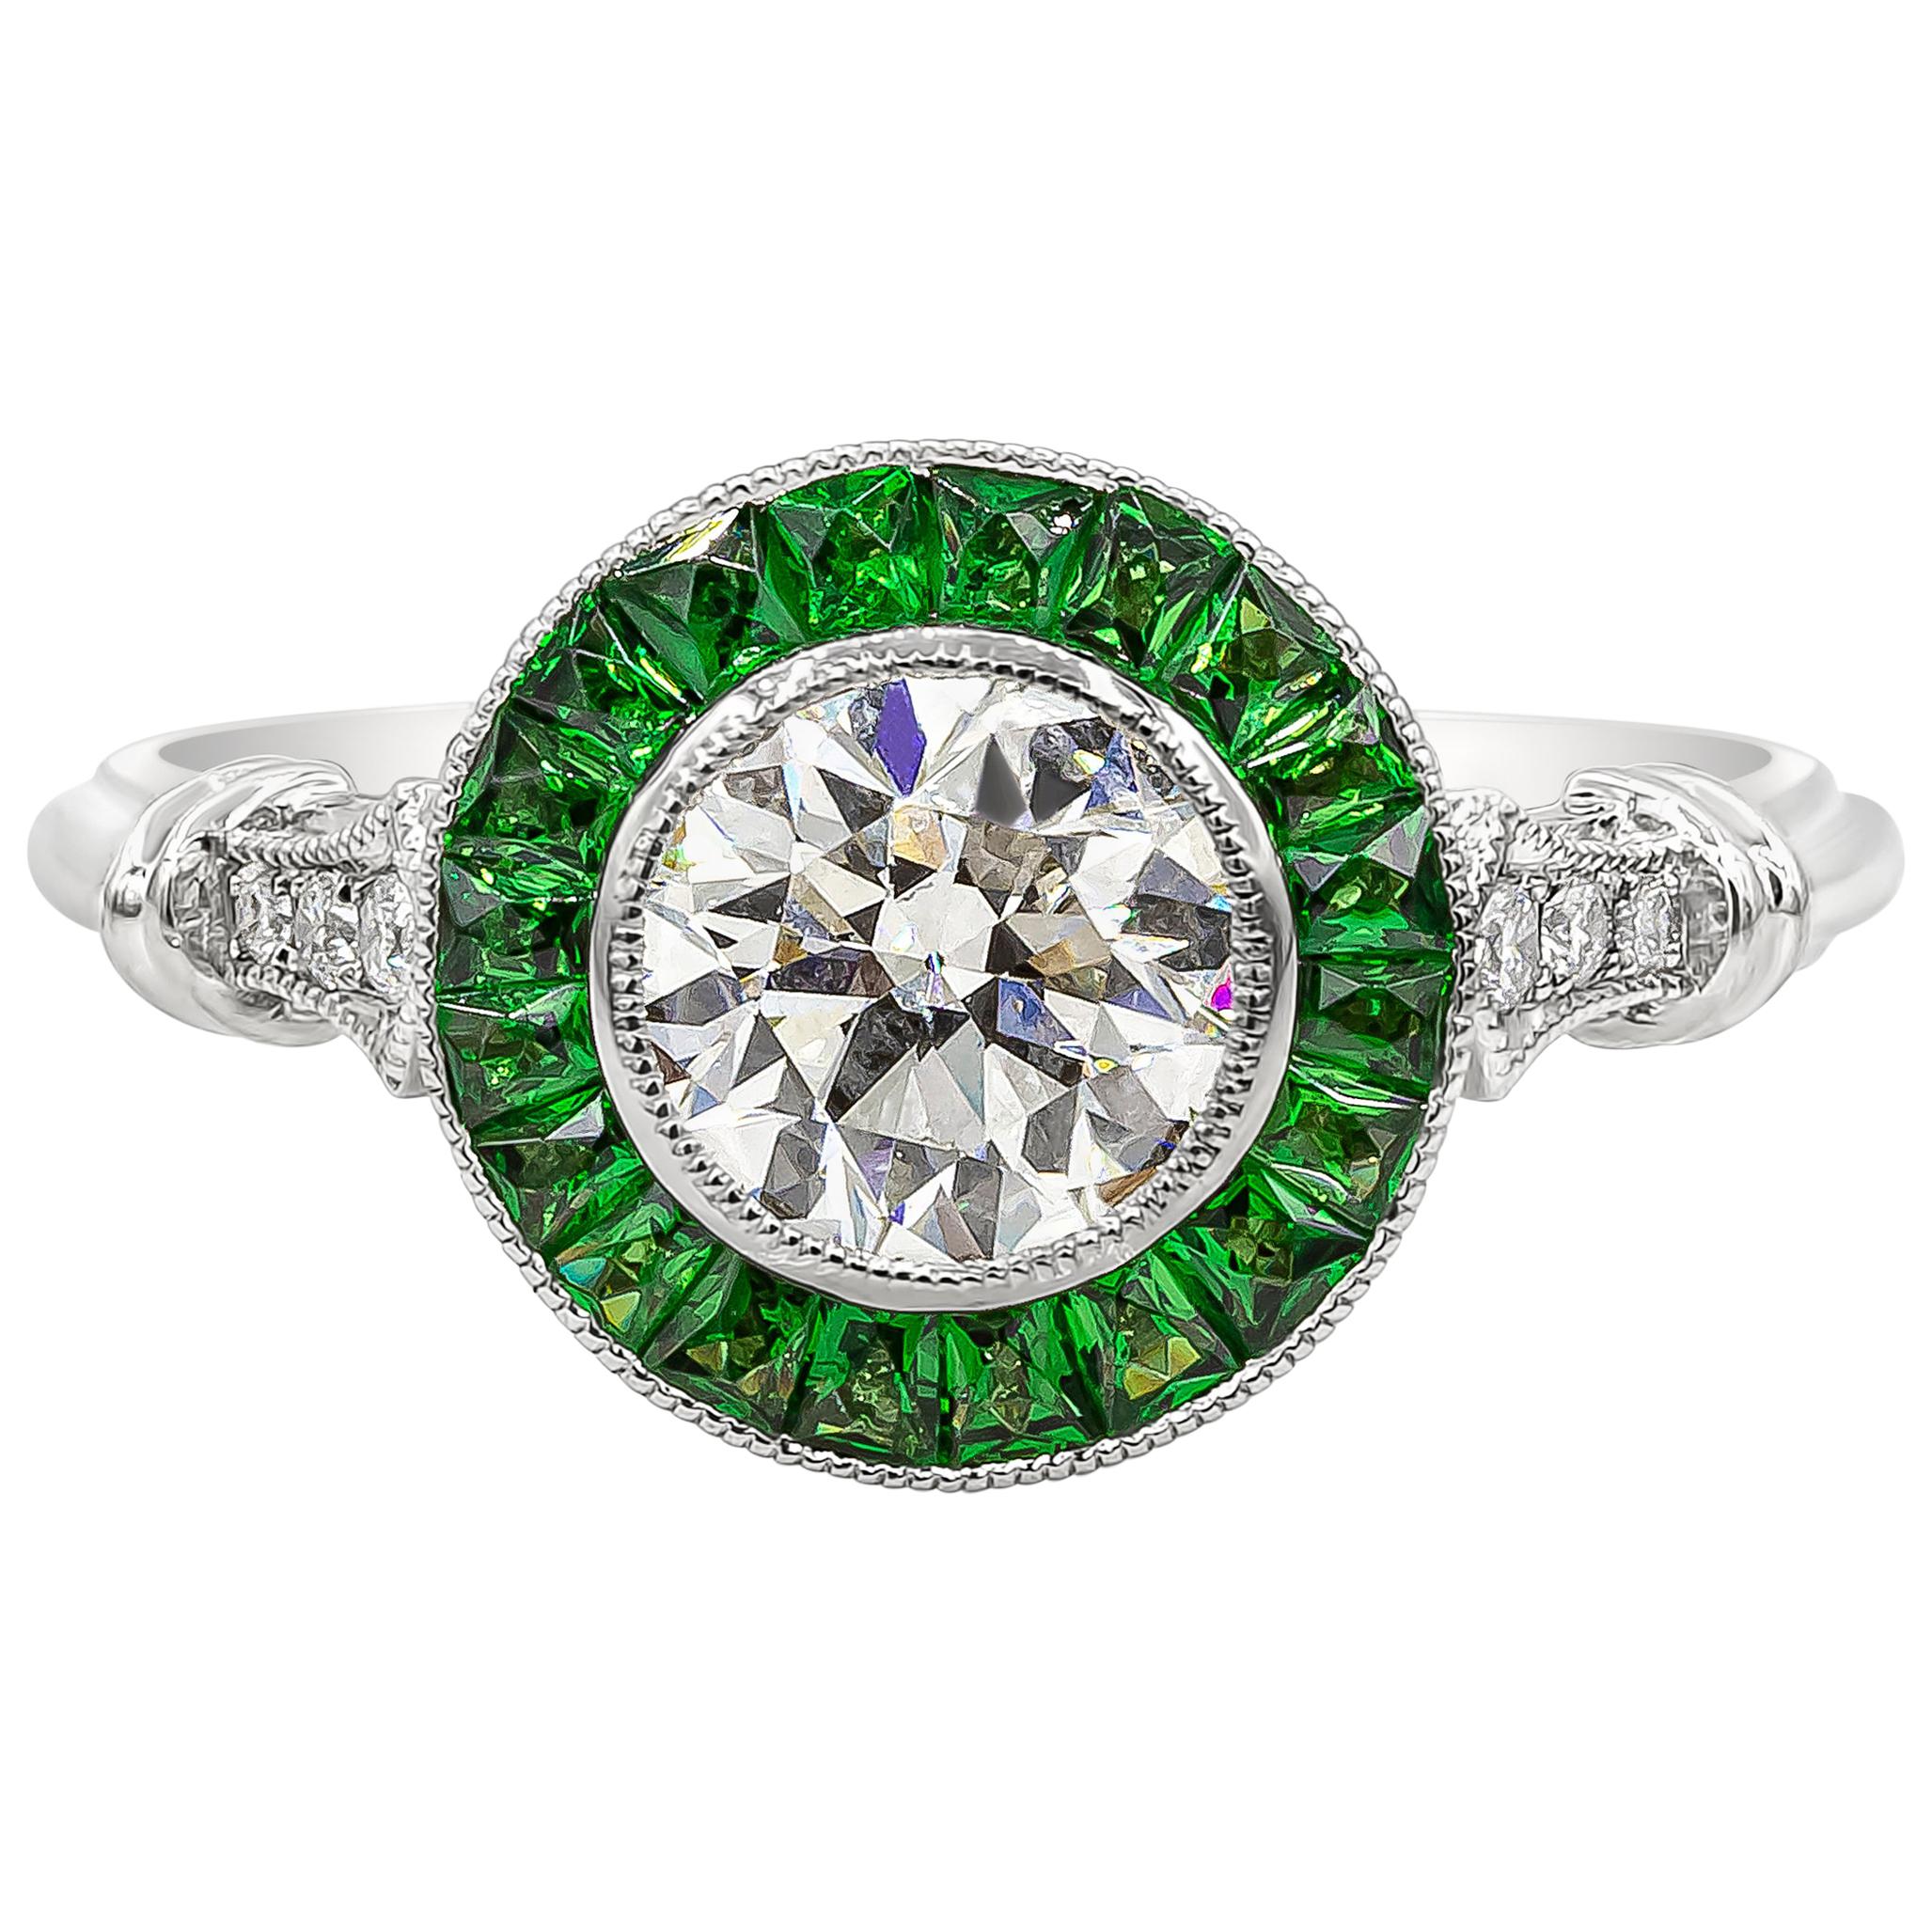 1.01 Carats Total Round Diamond with Tsavorite Art Deco Style Engagement Ring For Sale